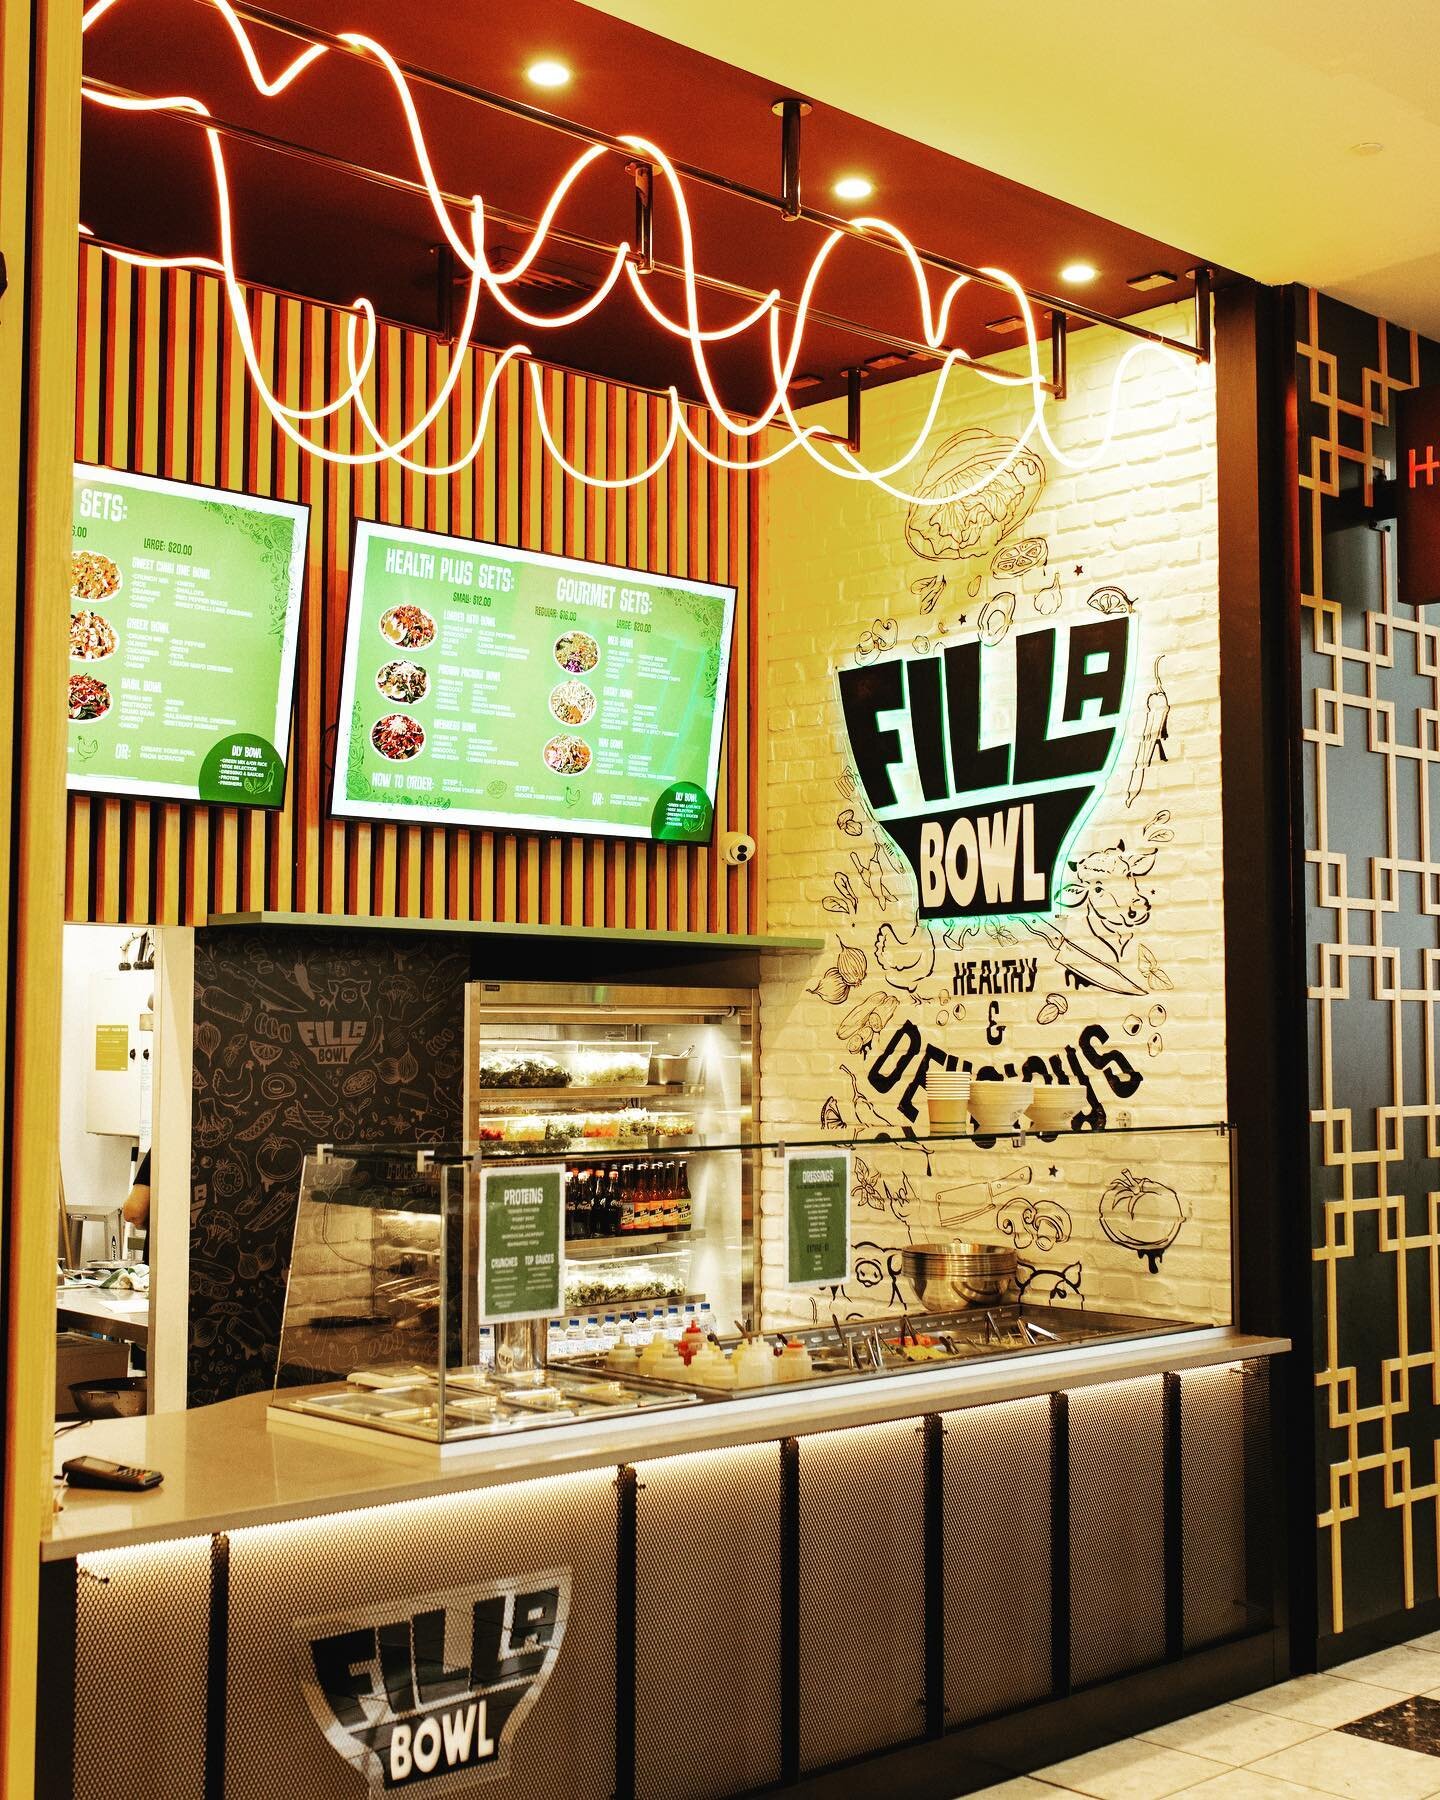 A Fillabowl fitout we completed in record time in the busy pre Christmas rush last year! 

Designed and project managed by our team for the @fillabowlnz crew this was a new look for them that they plan to roll out nation wide. 

👉🏼 check it out!

?